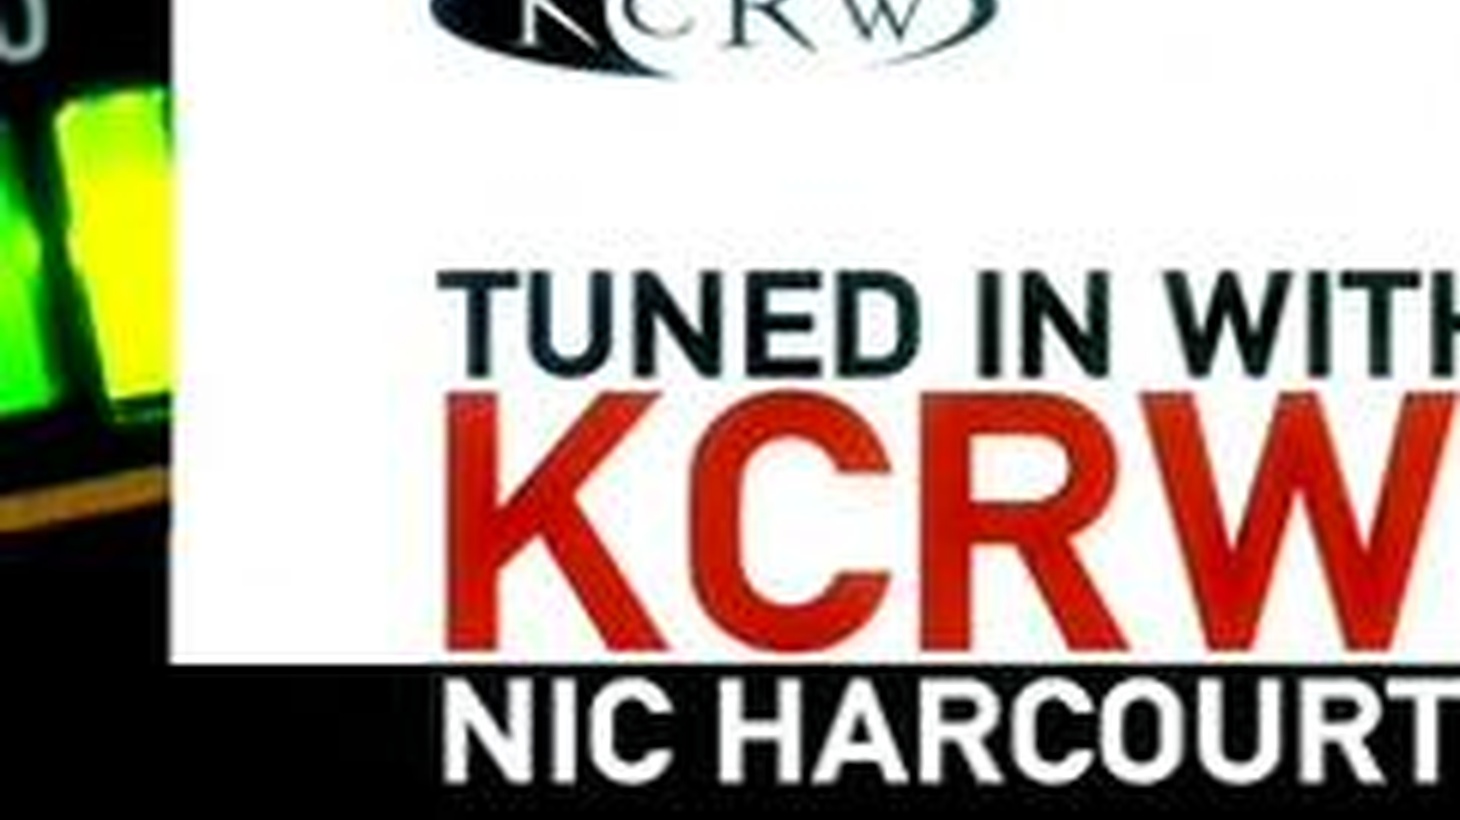 In the pilot episode of Tuned In, Nic Harcourt, the host of KCRW’s Morning Becomes Eclectic and the nationally syndicated Sounds Eclectic, discusses the latest from...